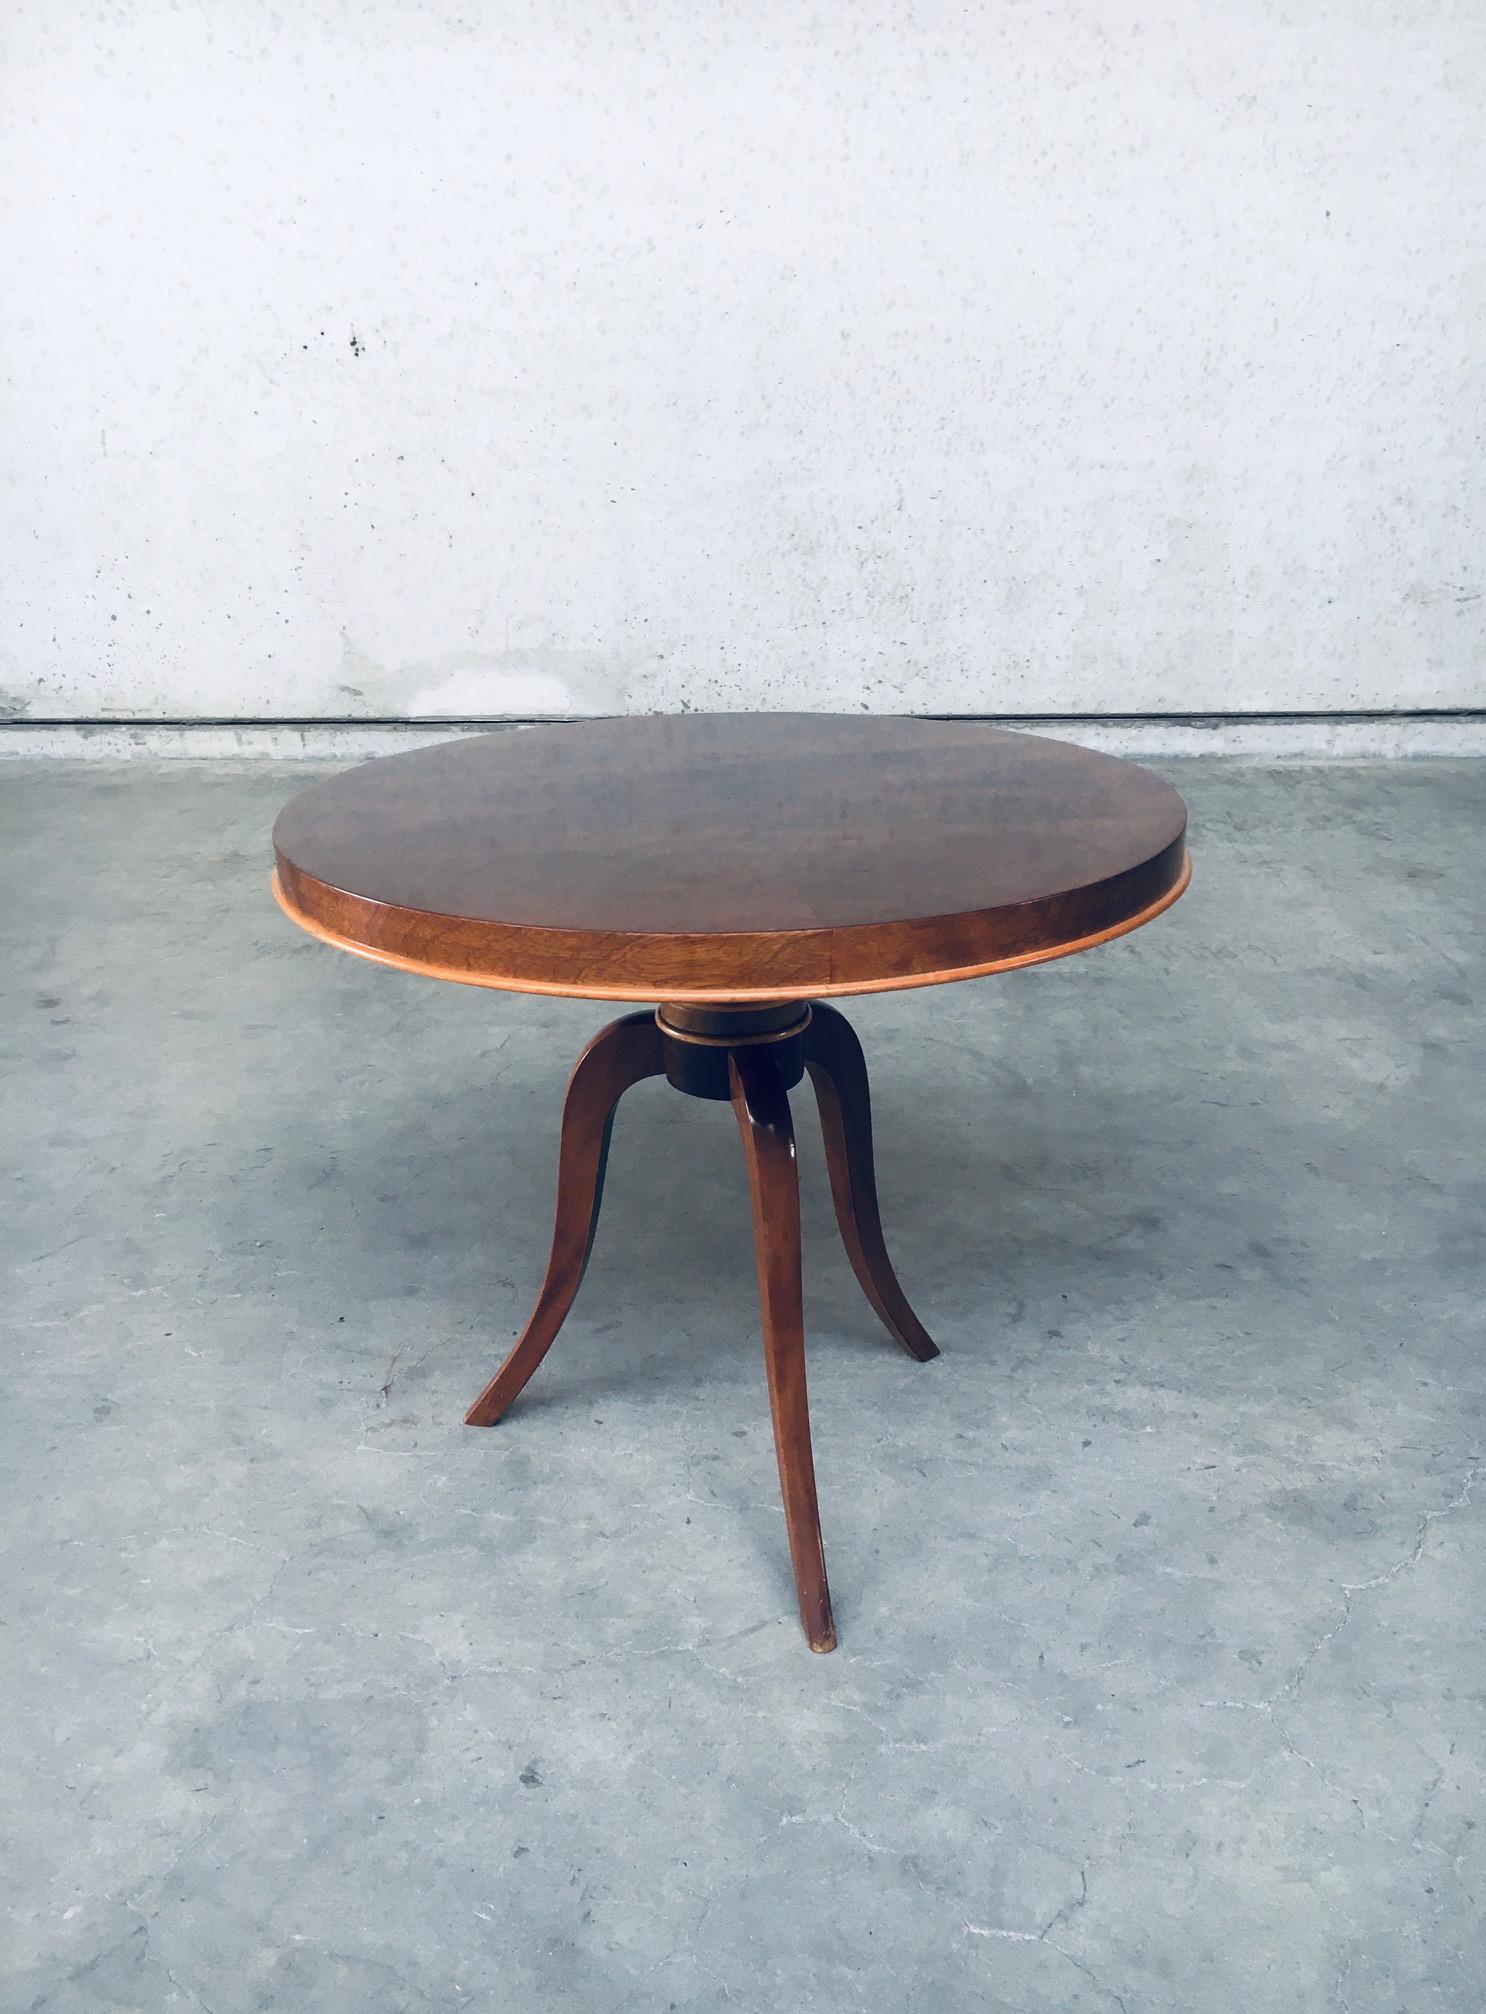 Vintage Art Deco Tripod Round Side Table in Rosewood, made in France 1930's. Parquetry quadrifoil top in rosewood with beech wood trim. Solid rosewood tripod feet with beech wooden trims. In very good, original condition. Measures 62cm x 71cm x 71cm.